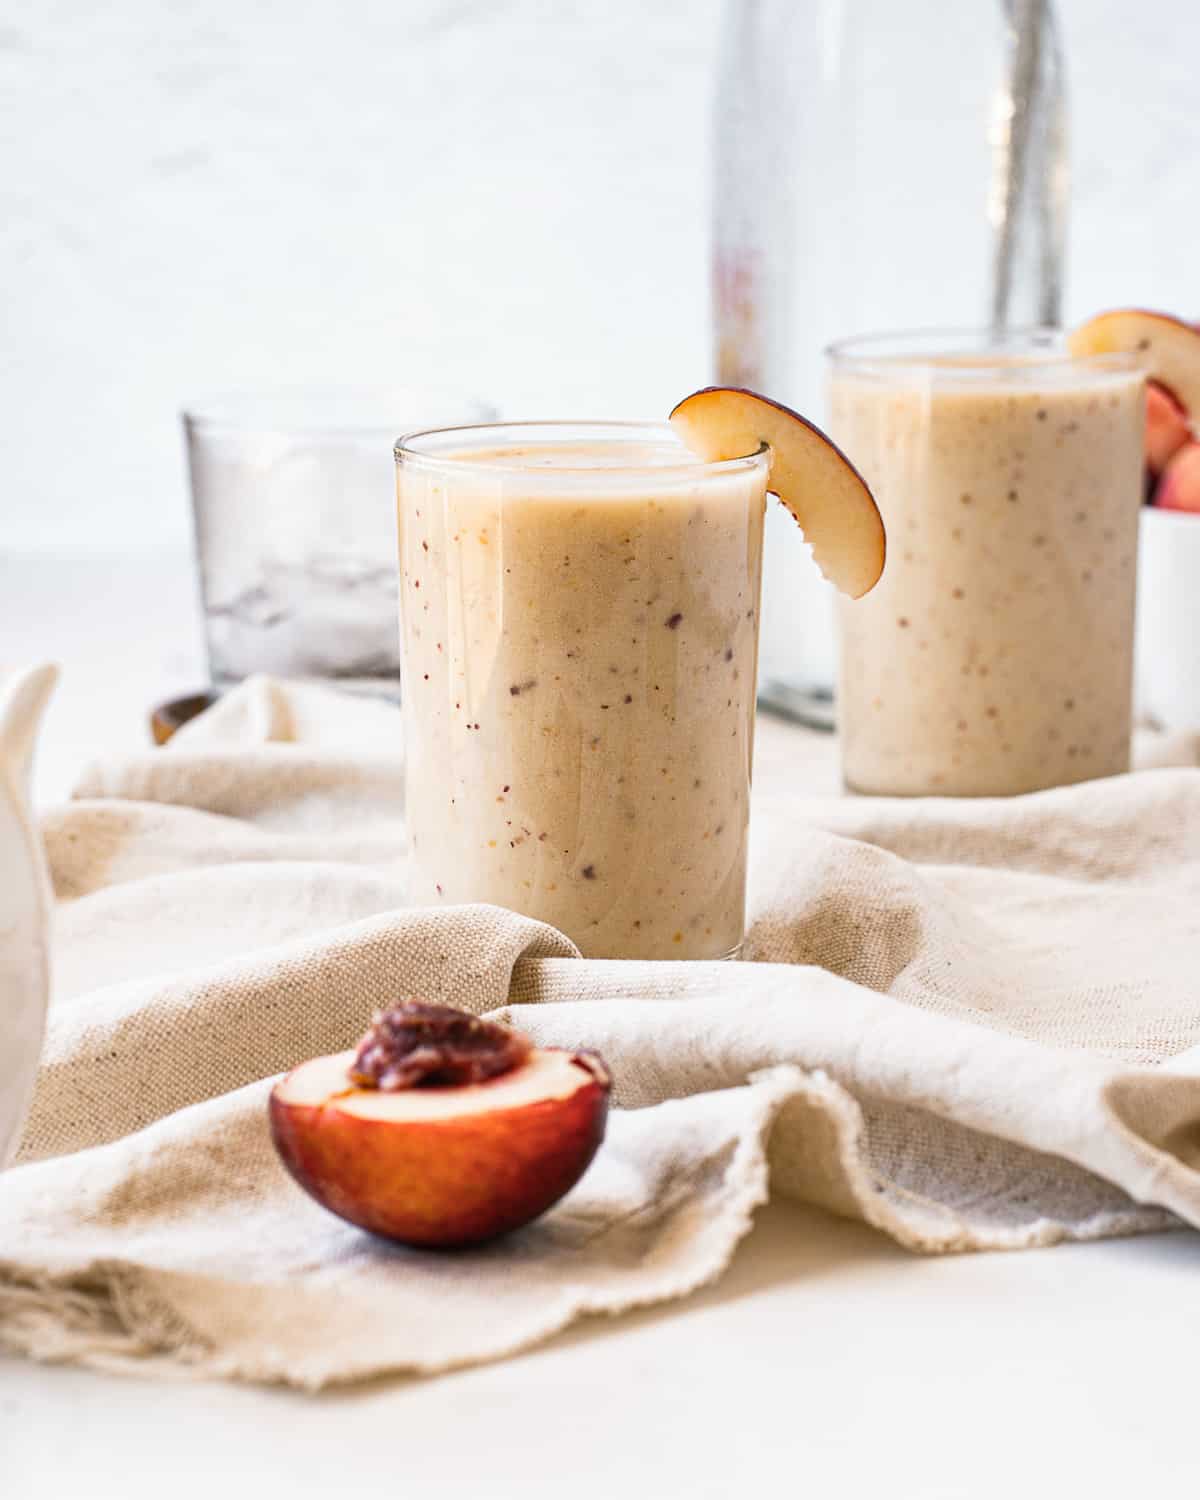 Two light orange-ish brown smoothies garnished with nectarine slices.